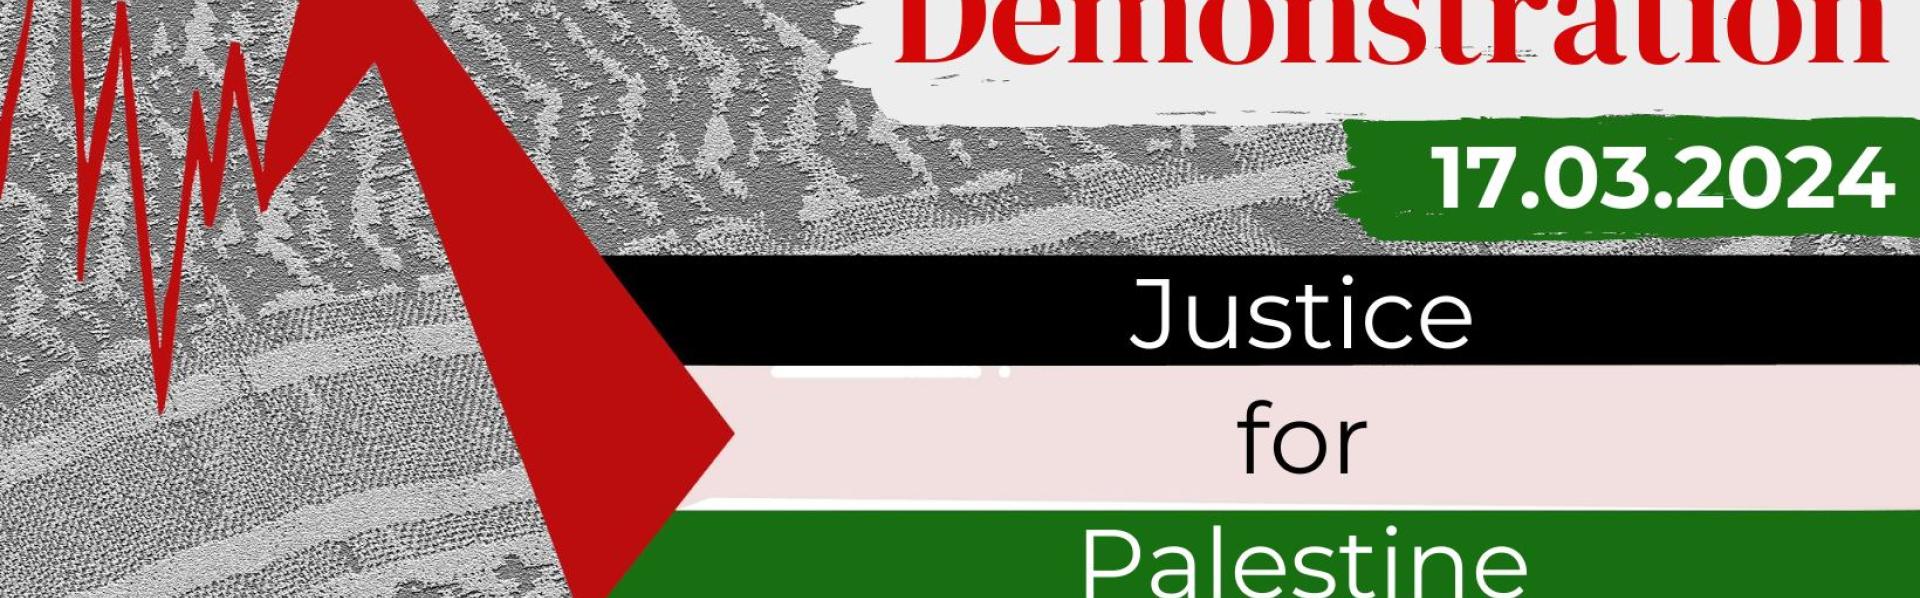 betoging Justice for Palestine